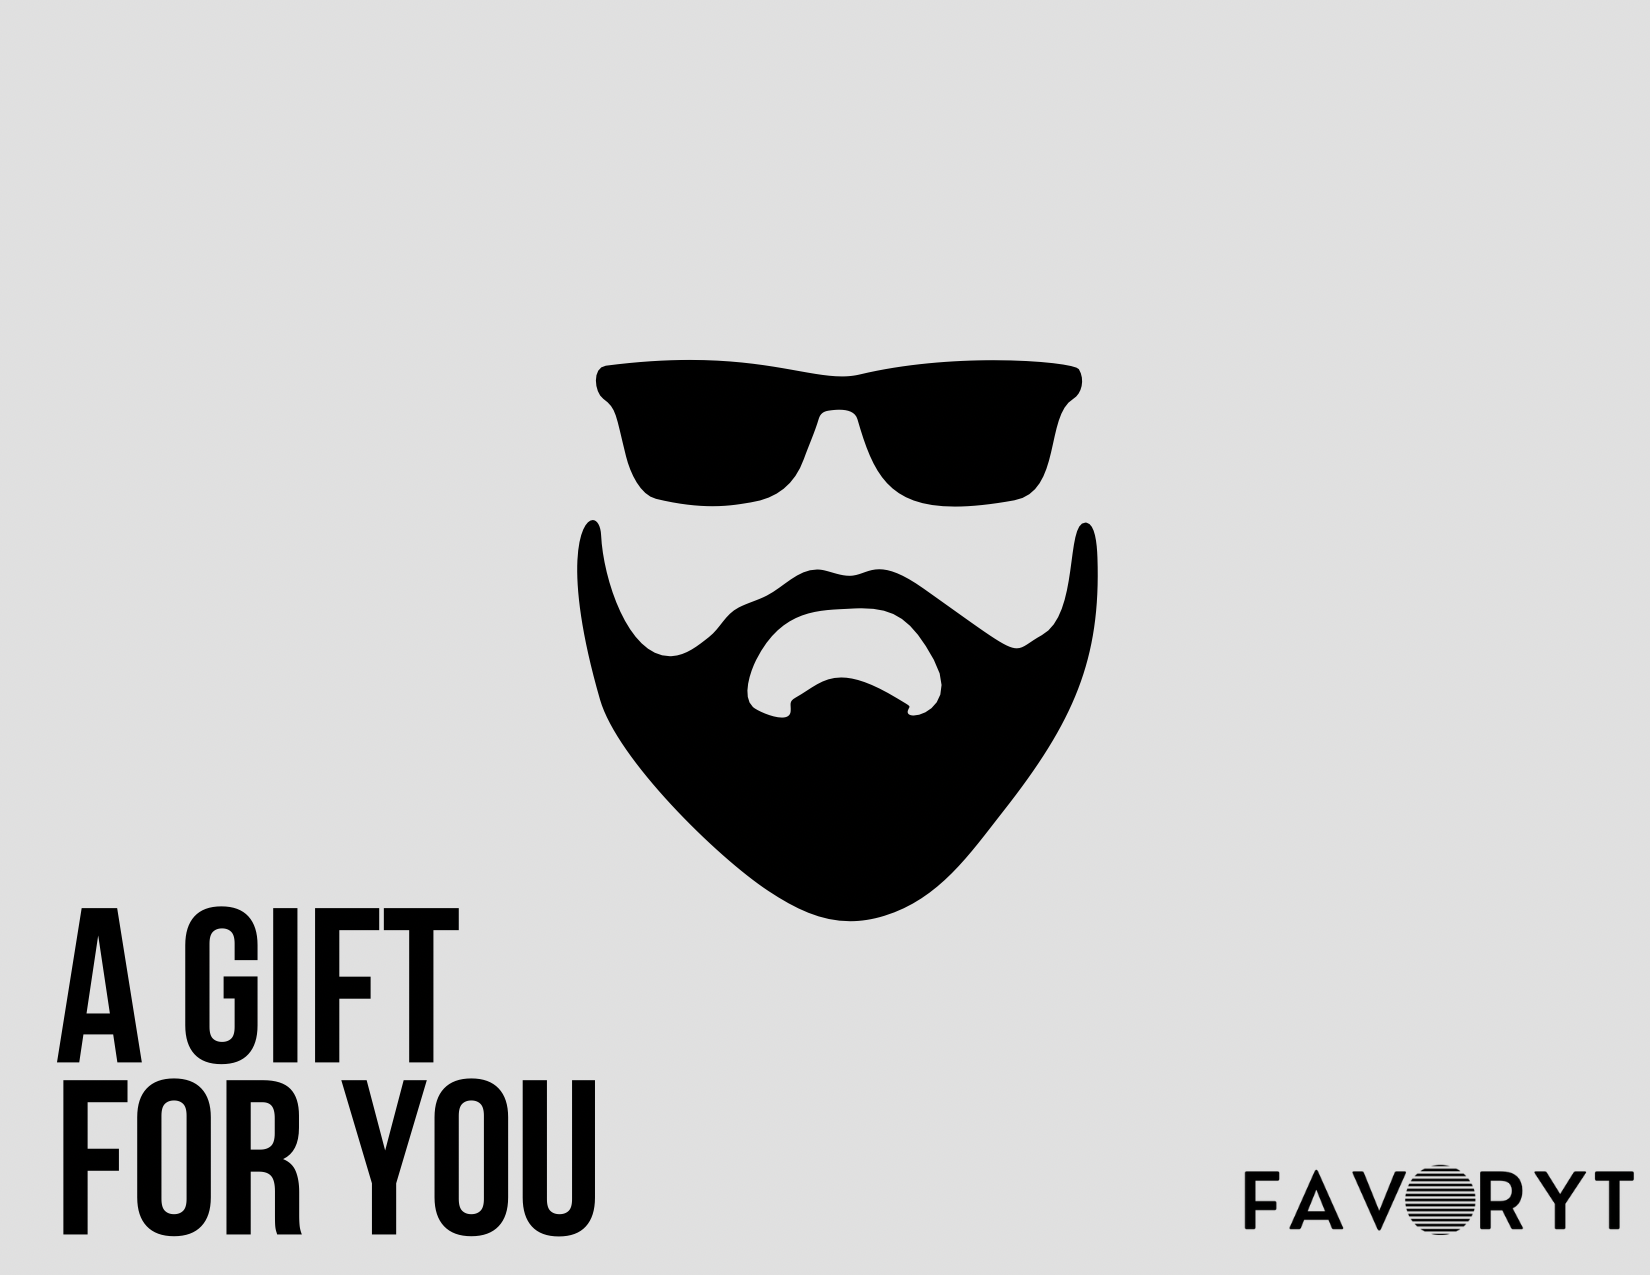 Gift Card - FAVORYT BRAND